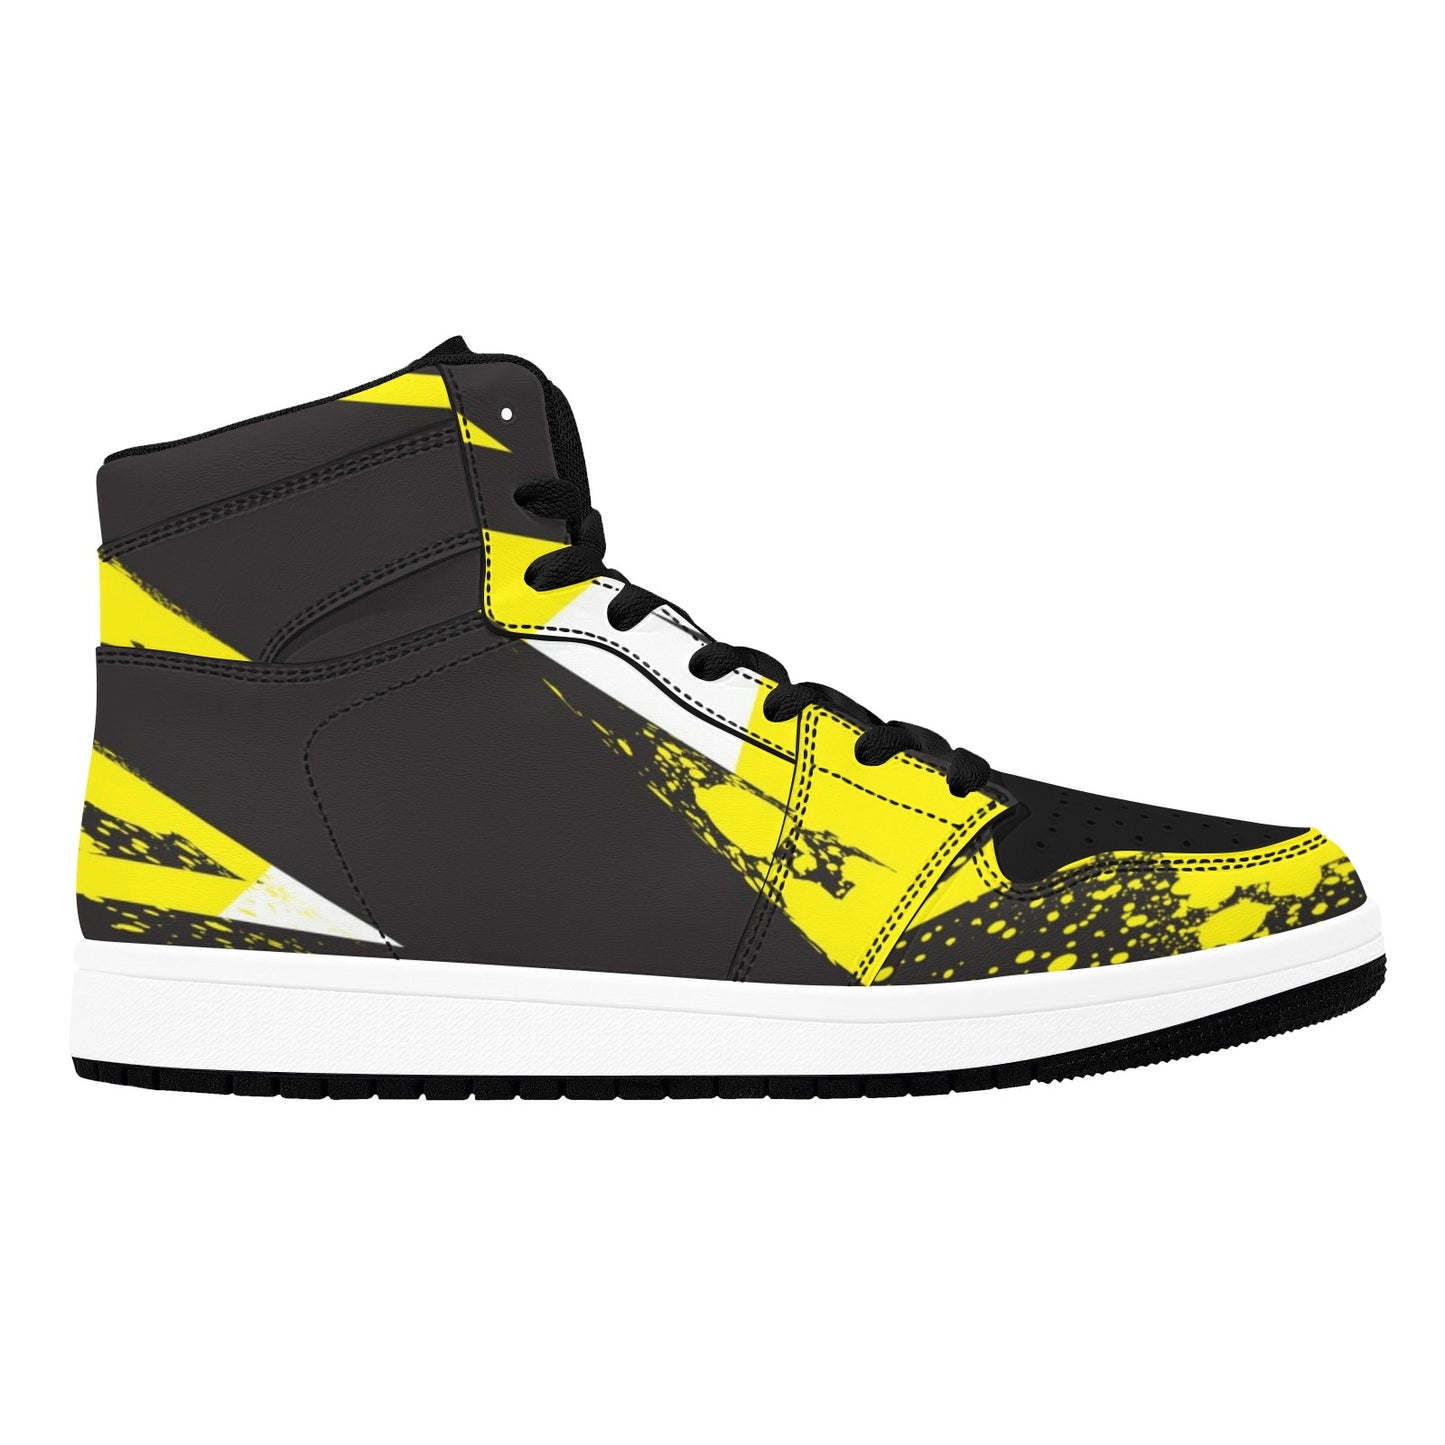 Black High Top Sneakers Yellow and White Stripes Hign Top Sneakers Men's High Top Sneakers